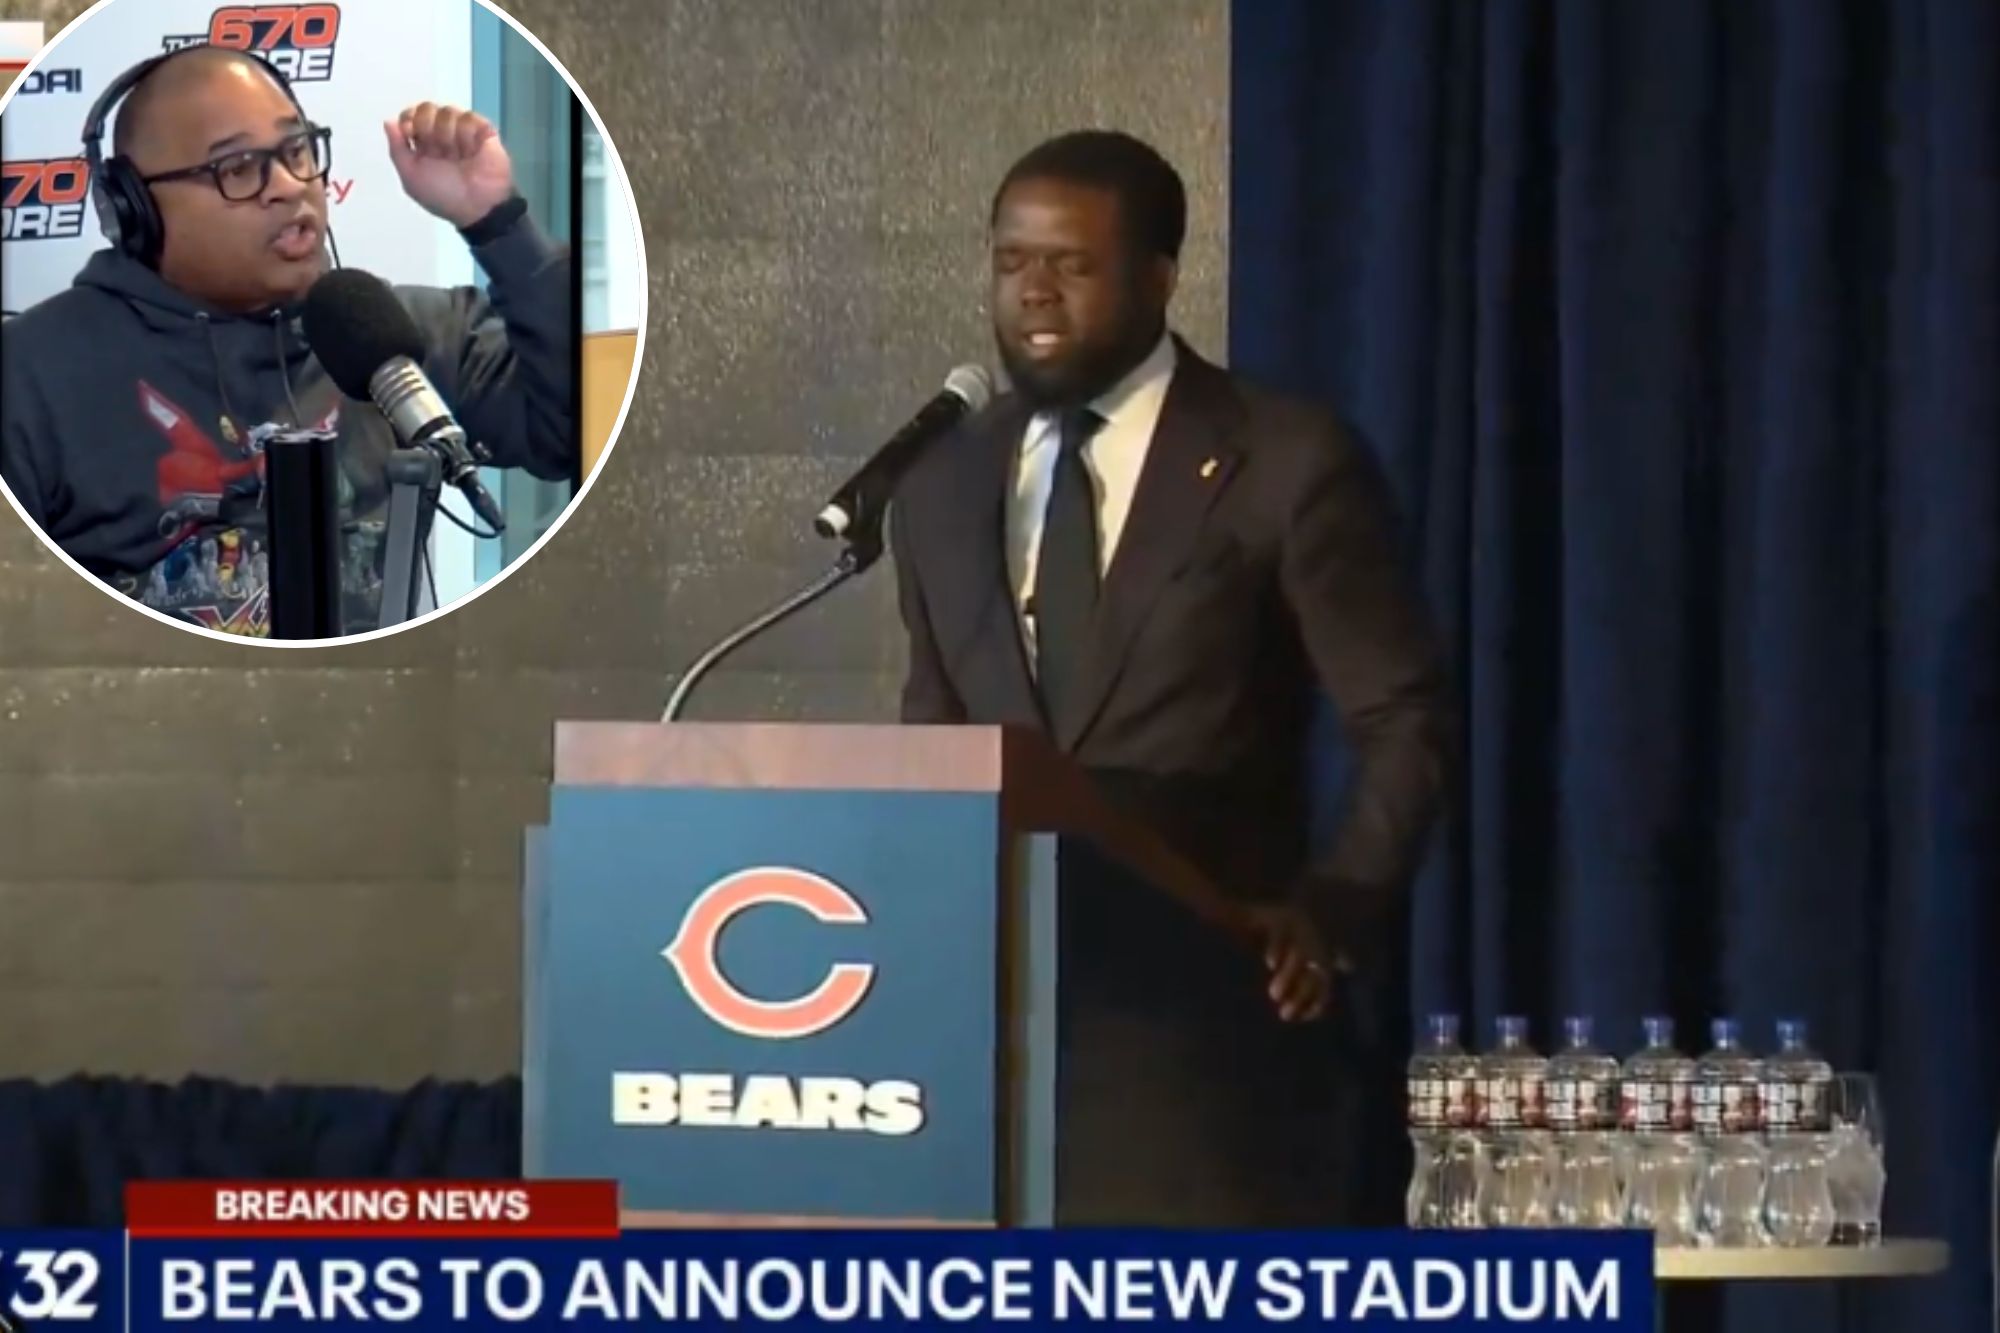 Chicago radio host Laurence Holmes skewered the Bears for bringing out a pastor to pray for a new stadium deal.